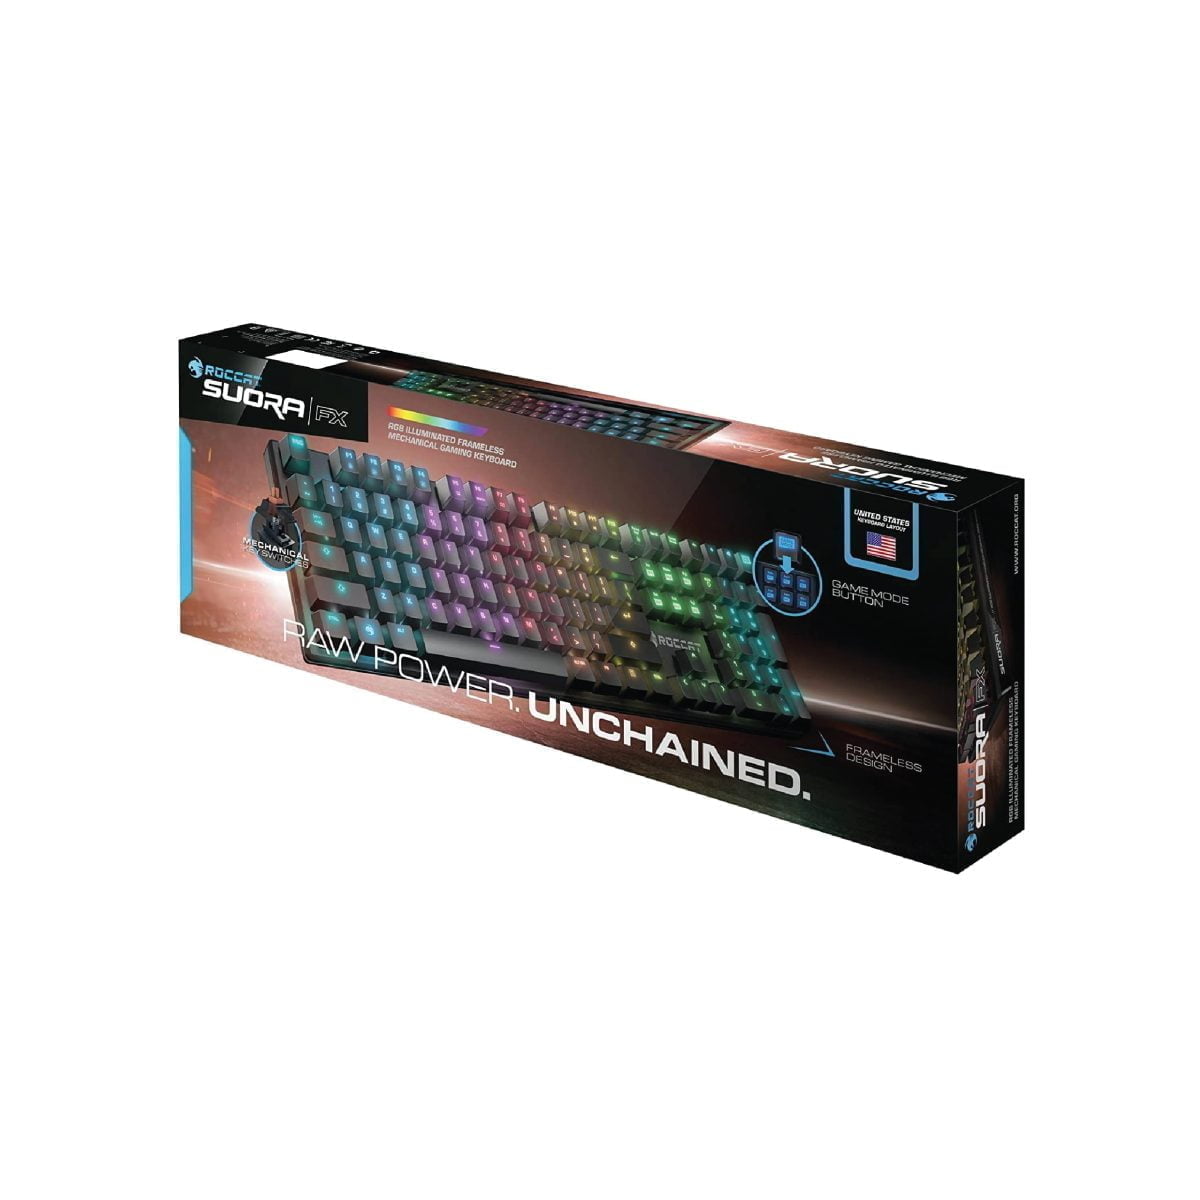 Ramadan2 26 Roccat 16.8M Color Key Back-Lighting With Quick Access To Stunning Effects Plus F1-F4 Key Lighting Fx Presets Quick Toggle: Wave, Breathing, Ripple, Solid Roccat Roccat Suora Fx - Rgb Illuminated Frameless Mechanical Gaming Keyboard